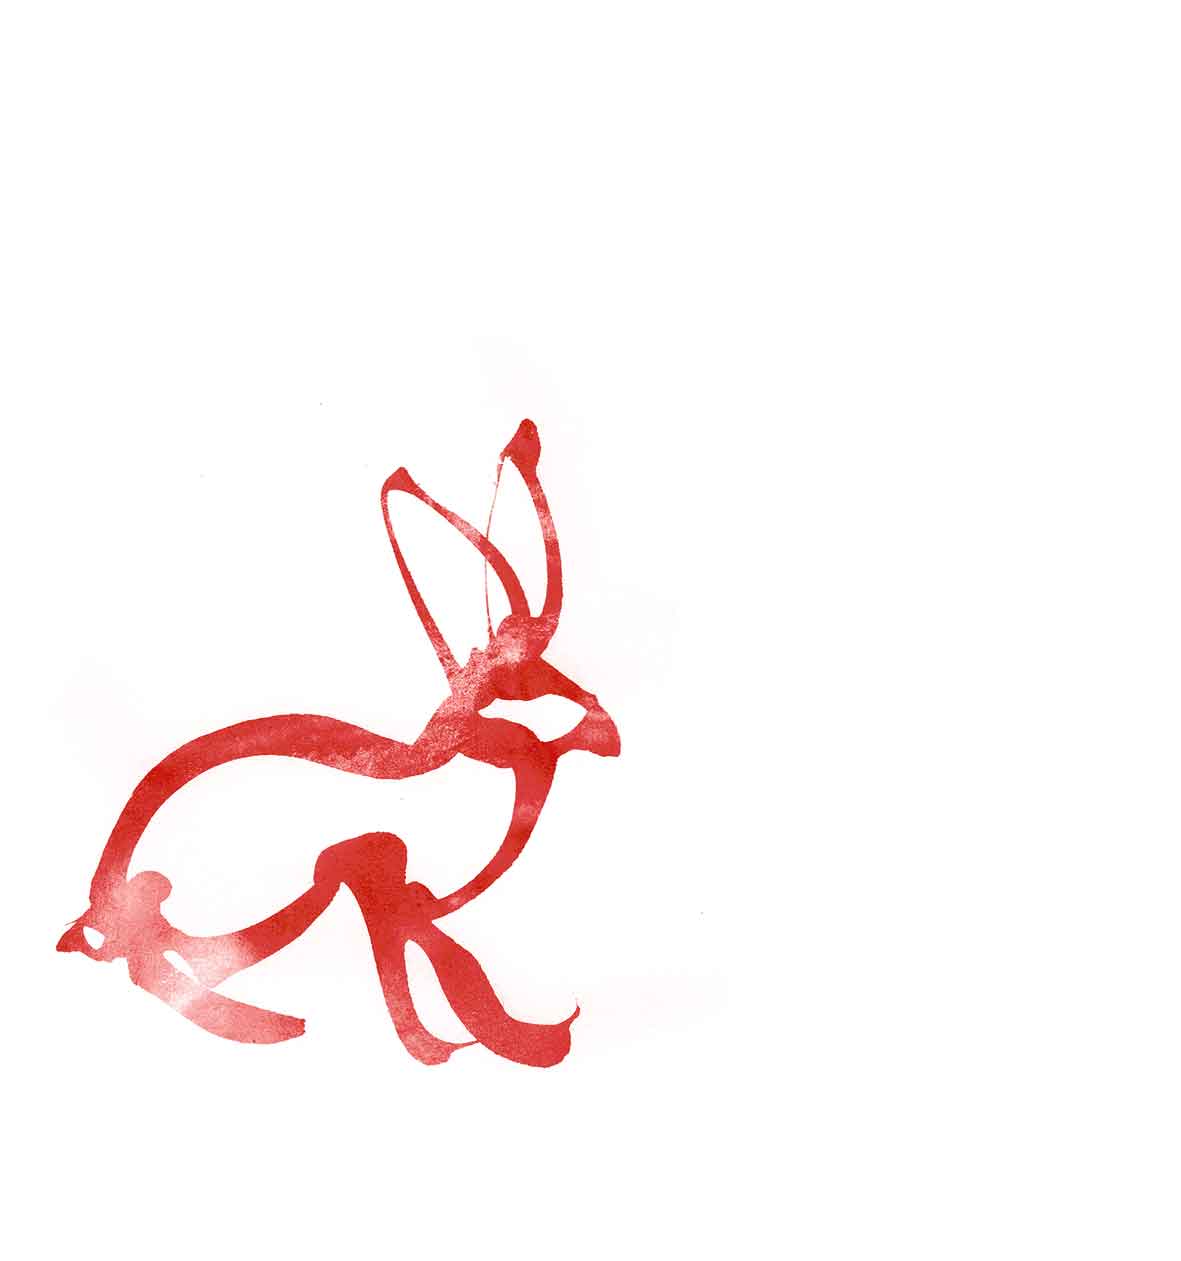 In celebration of the Lunar New Year. 2023 is the year of the Rabbit. A still from an animated linear illustration on loop for Giphy Arts